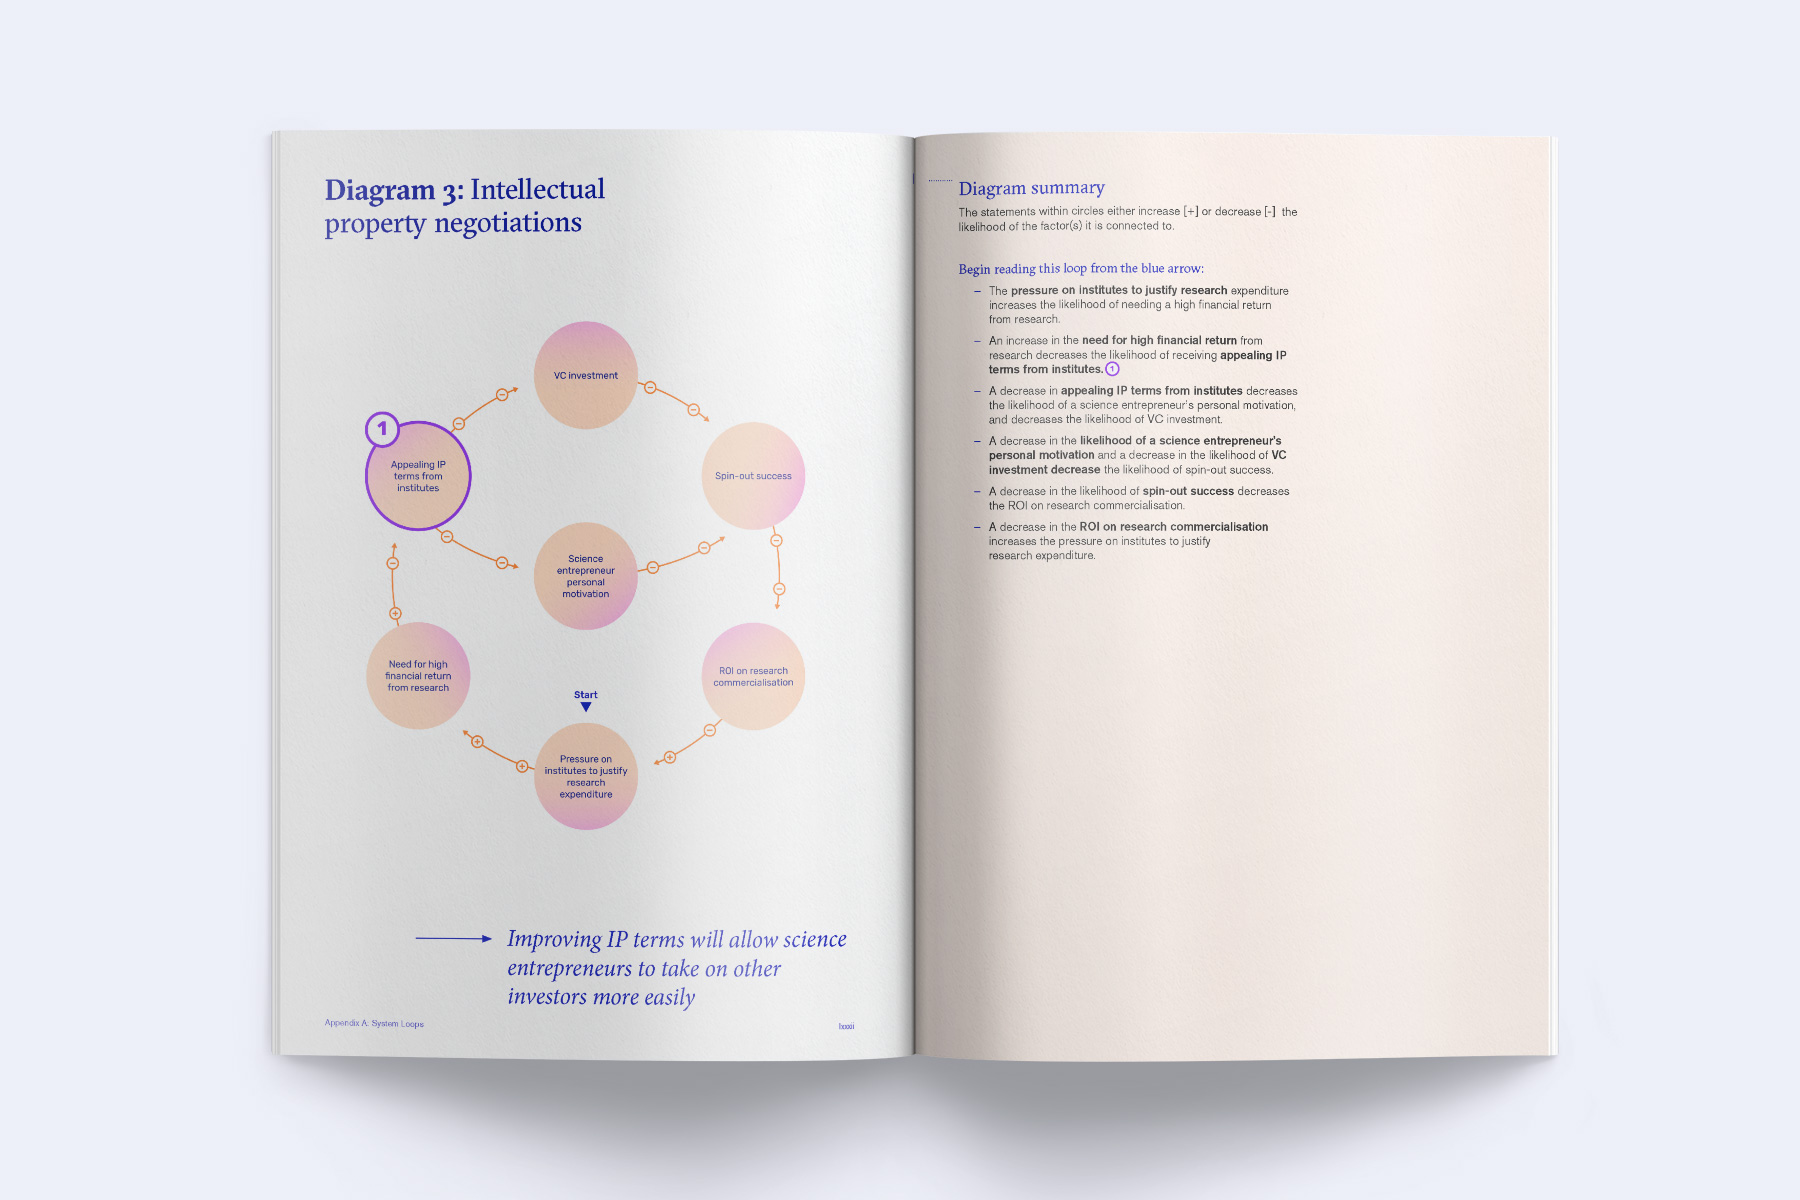 A spread from the report showing a systems map highlighting the different factors that affect intellectual property negotiations.